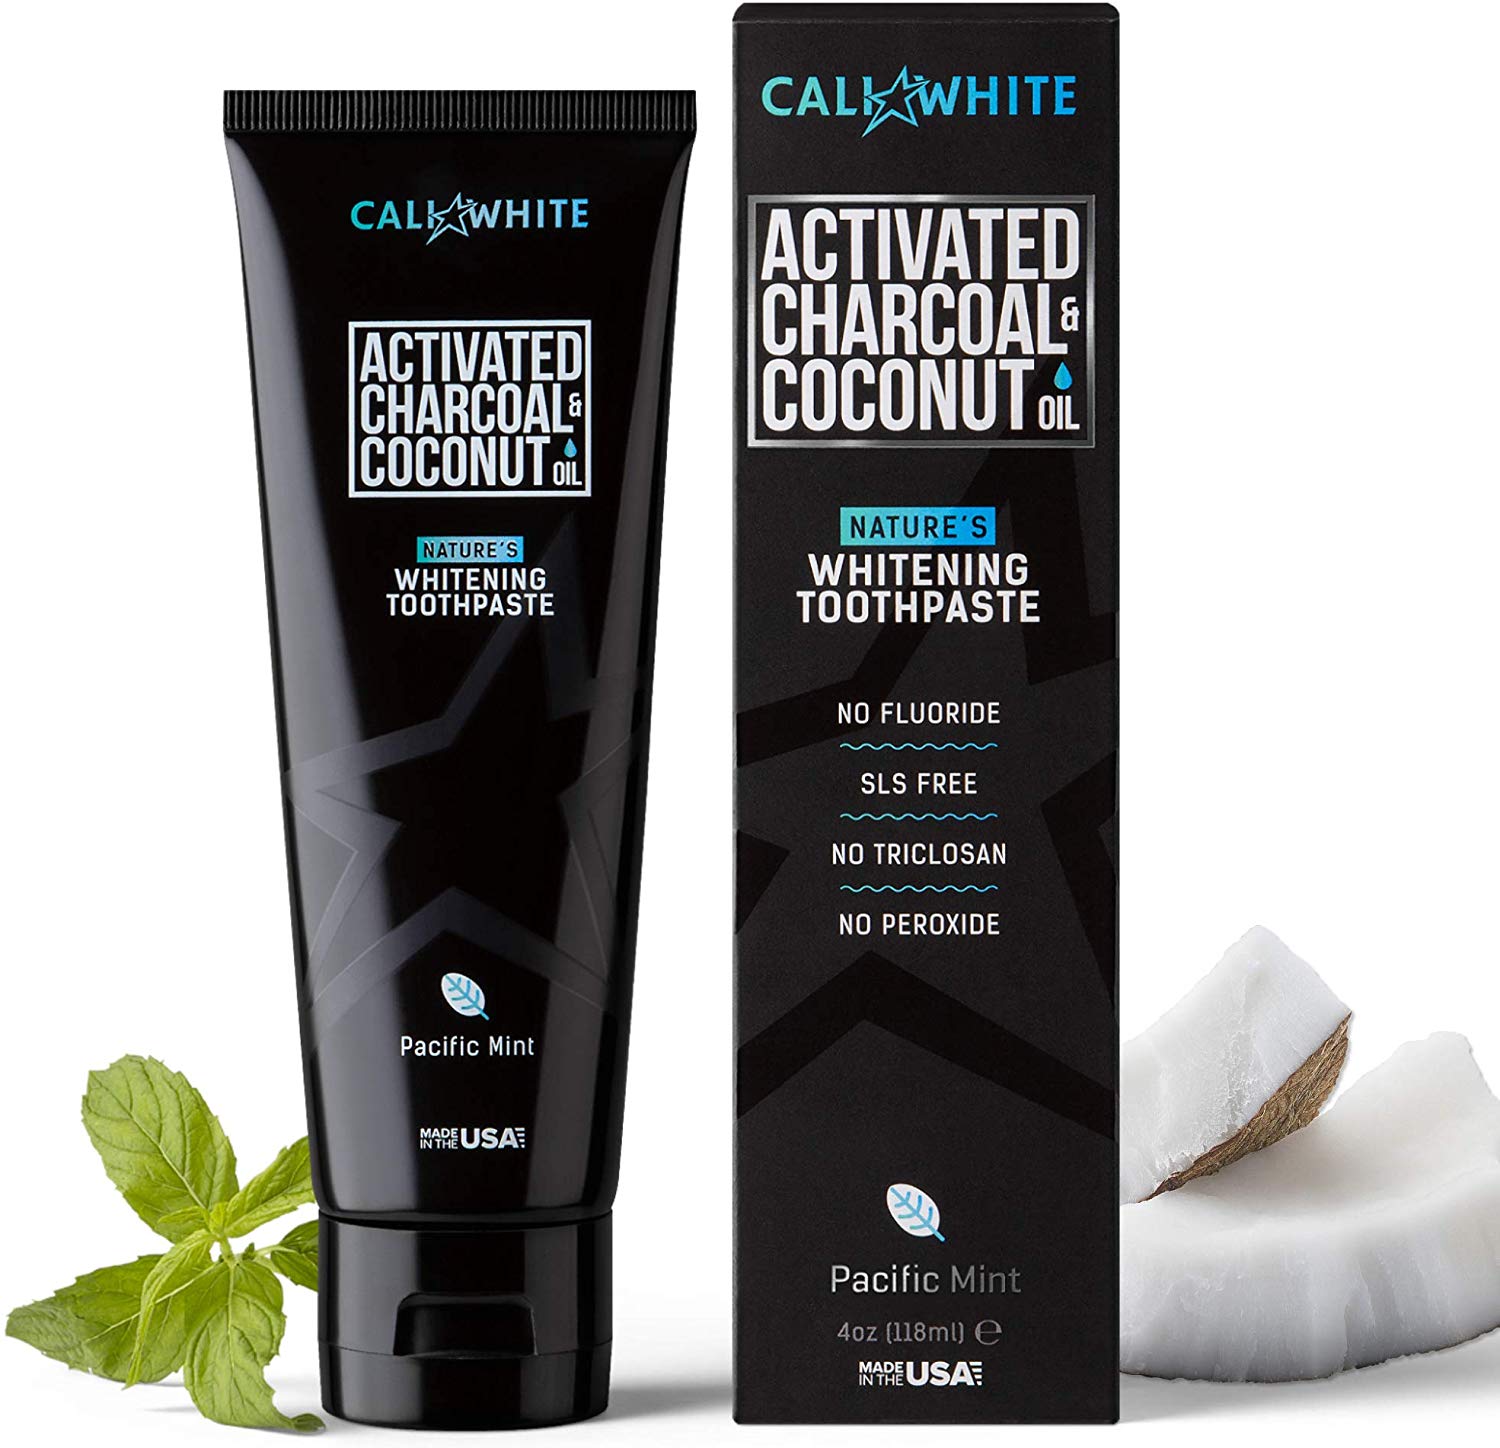 Cali White ACTIVATED CHARCOAL & ORGANIC COCONUT OIL TEETH WHITENING TOOTHPASTE,